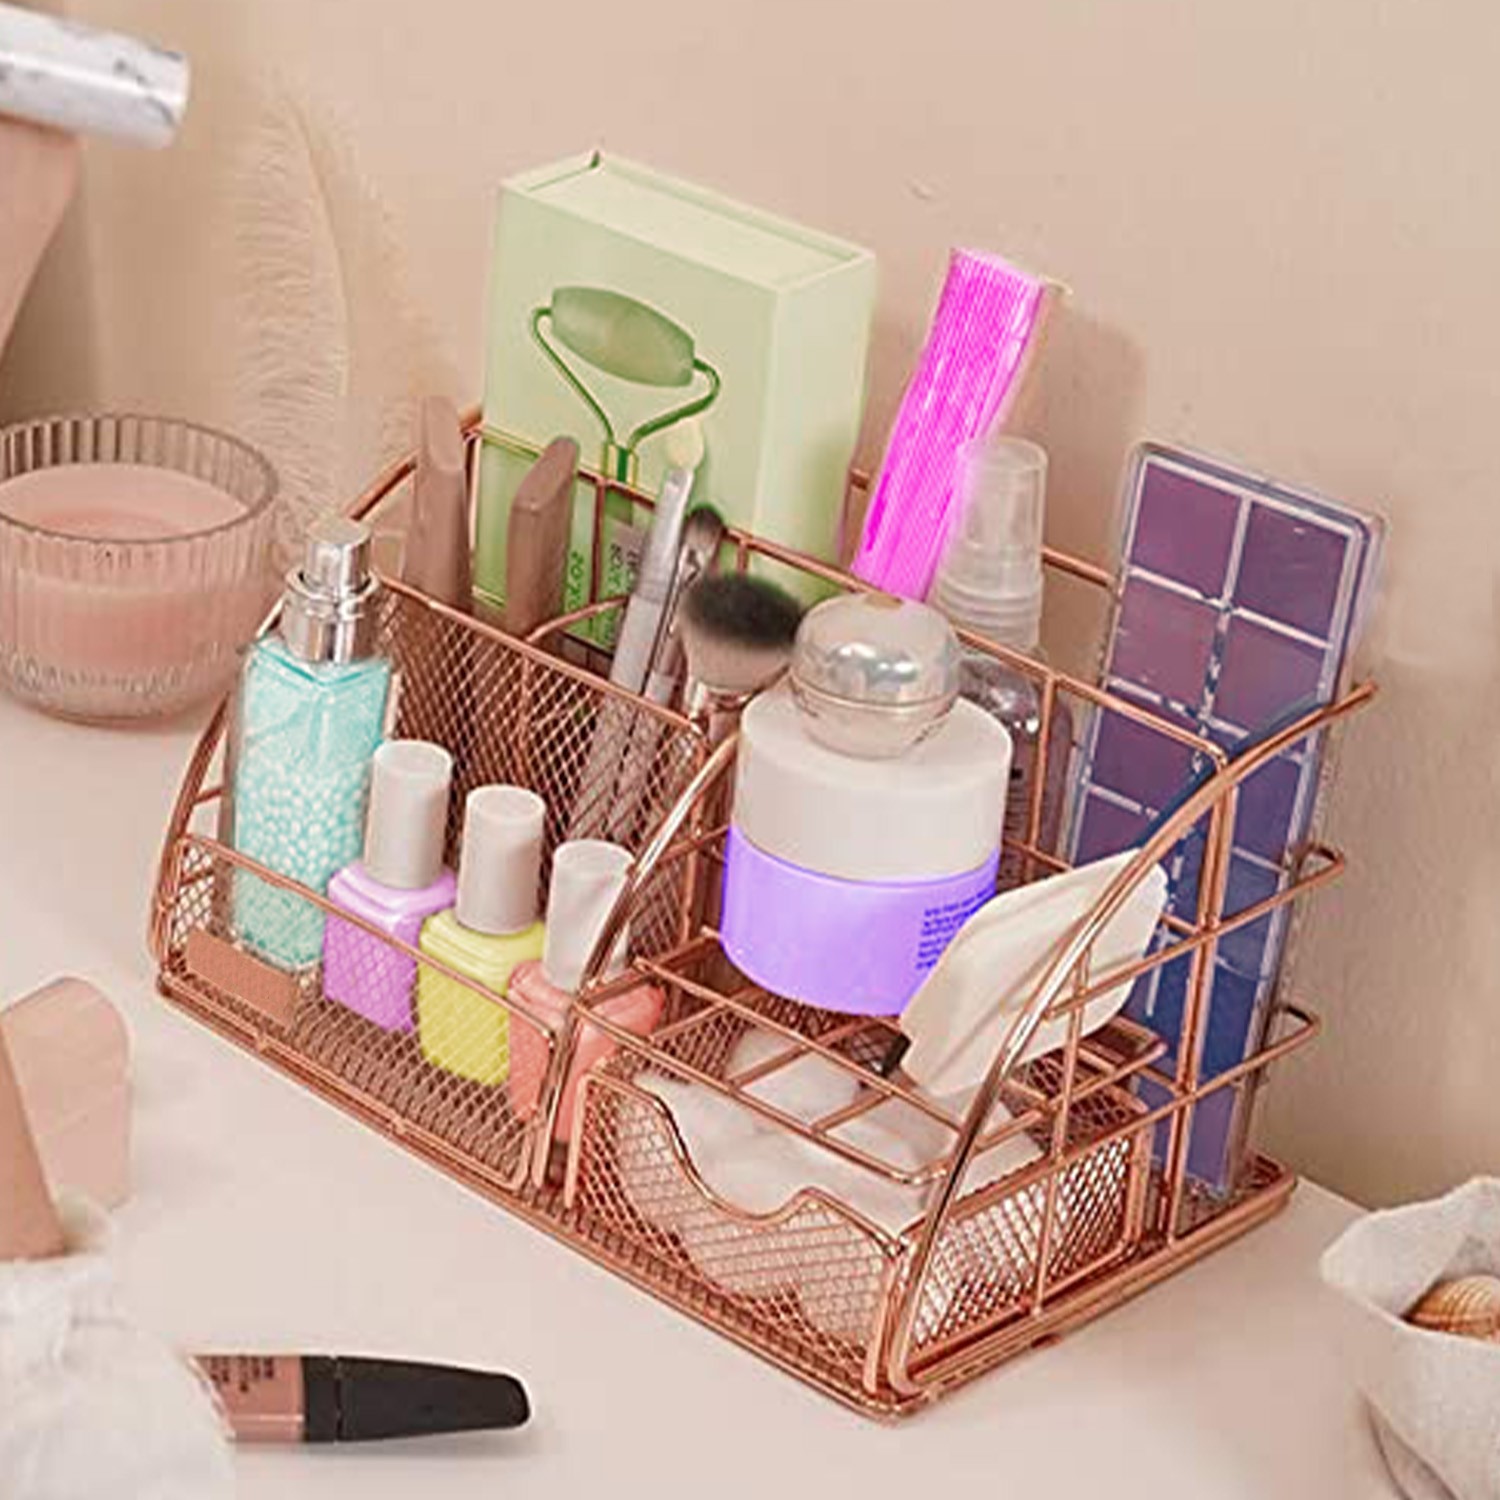 Stylish Rose Gold Makeup and Skin Care Organizer for Vanity